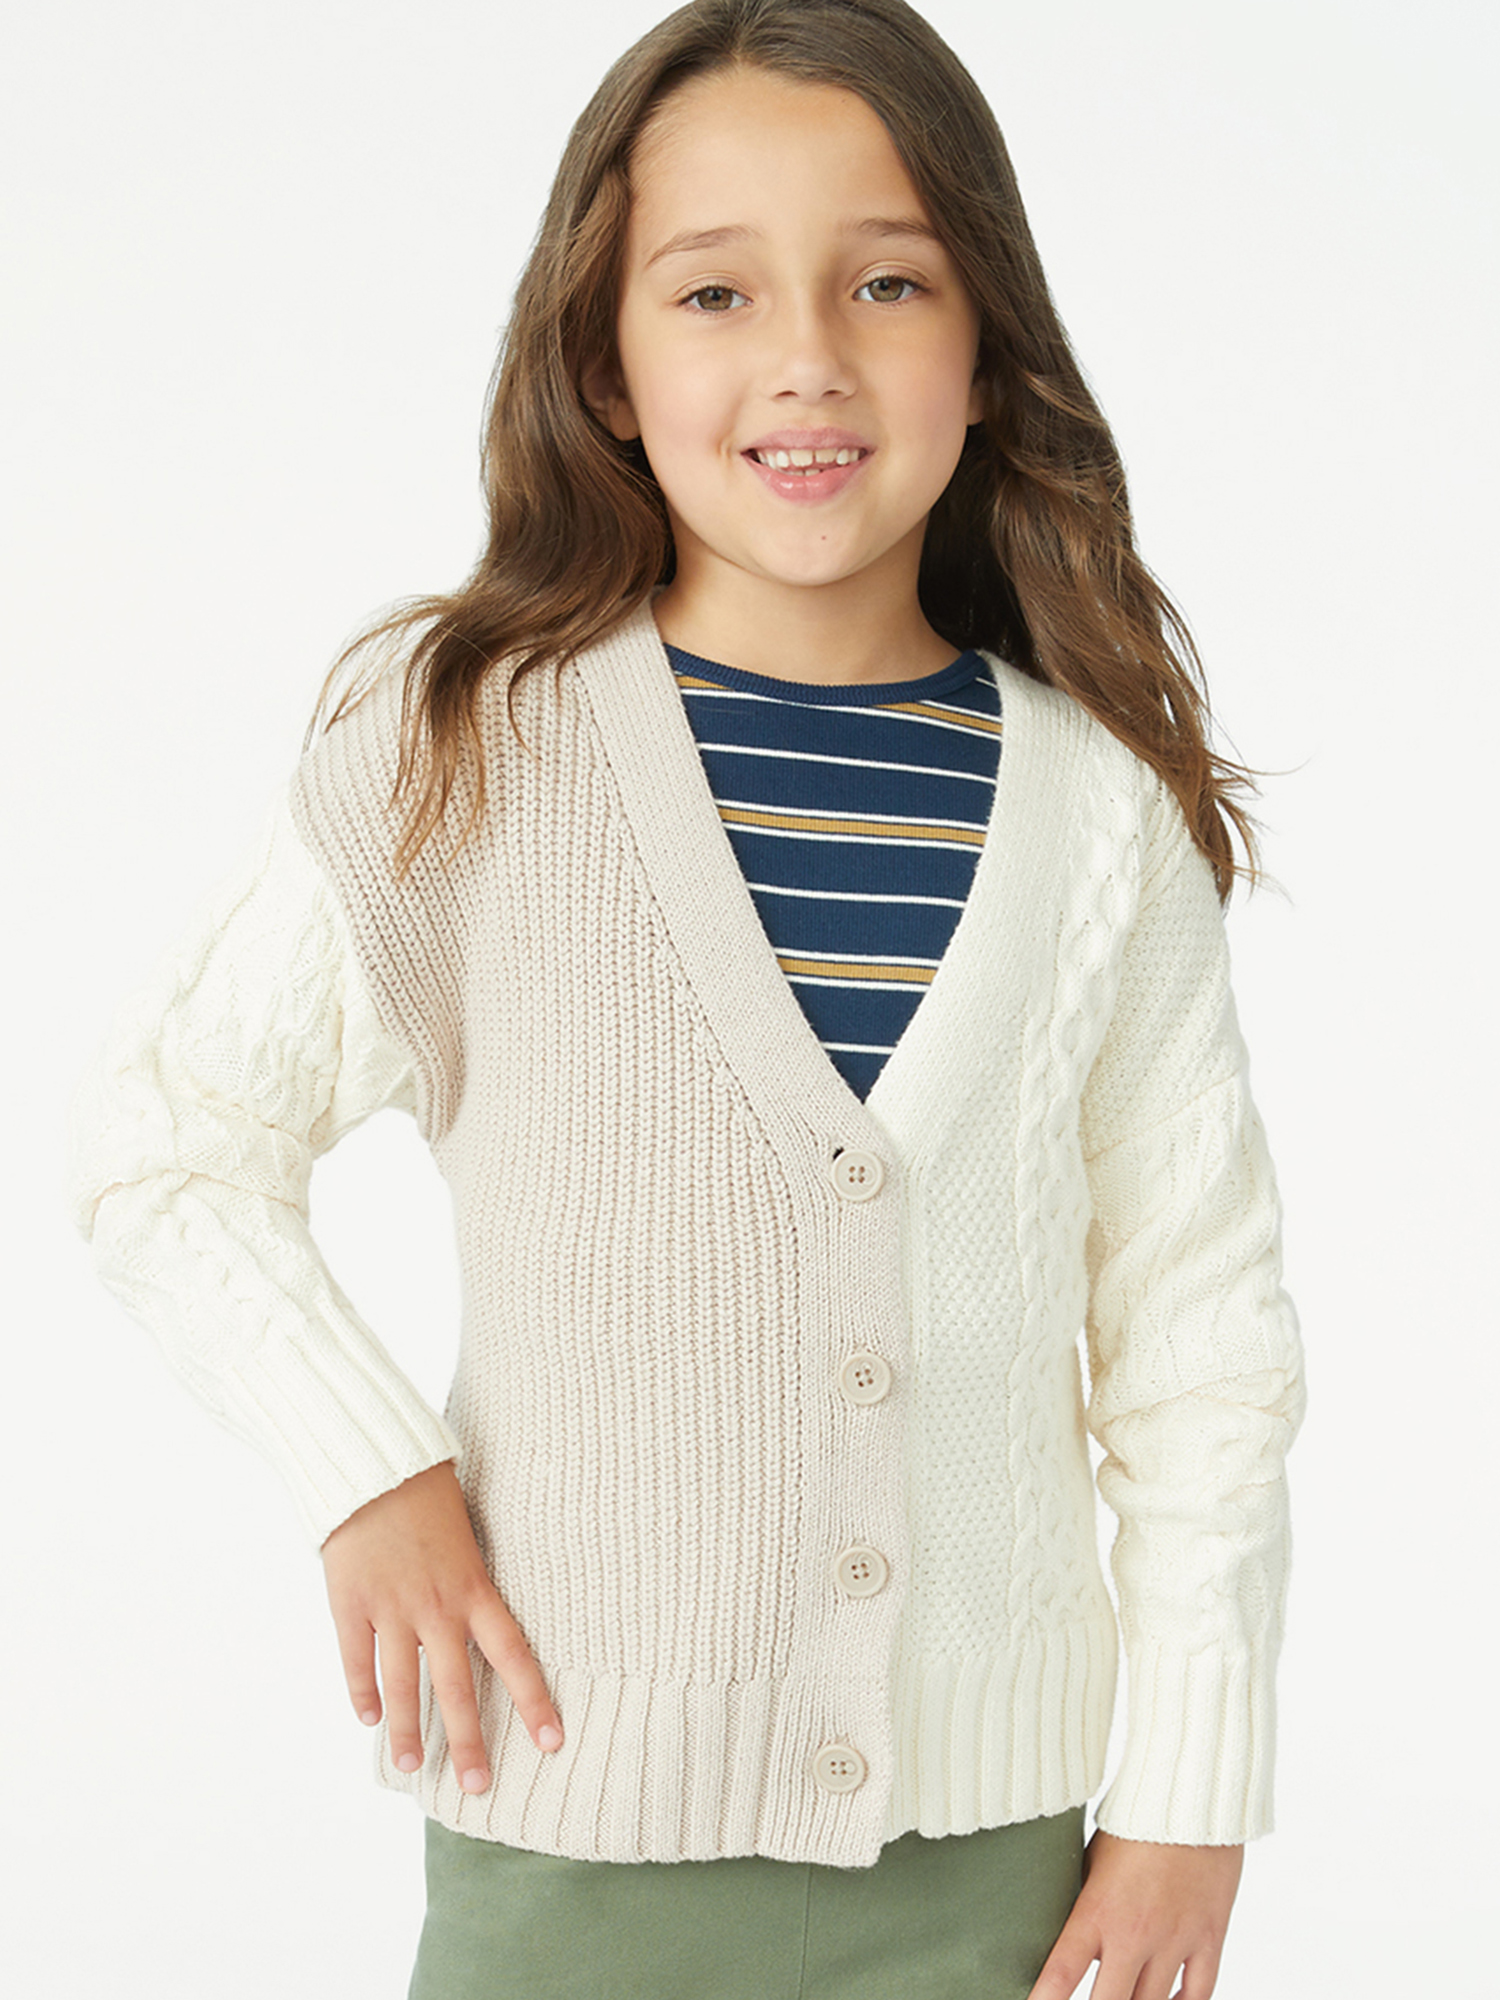 Free Assembly Girls Cable Knit Grandpa Cardigan, Sizes 4-18 - image 1 of 5